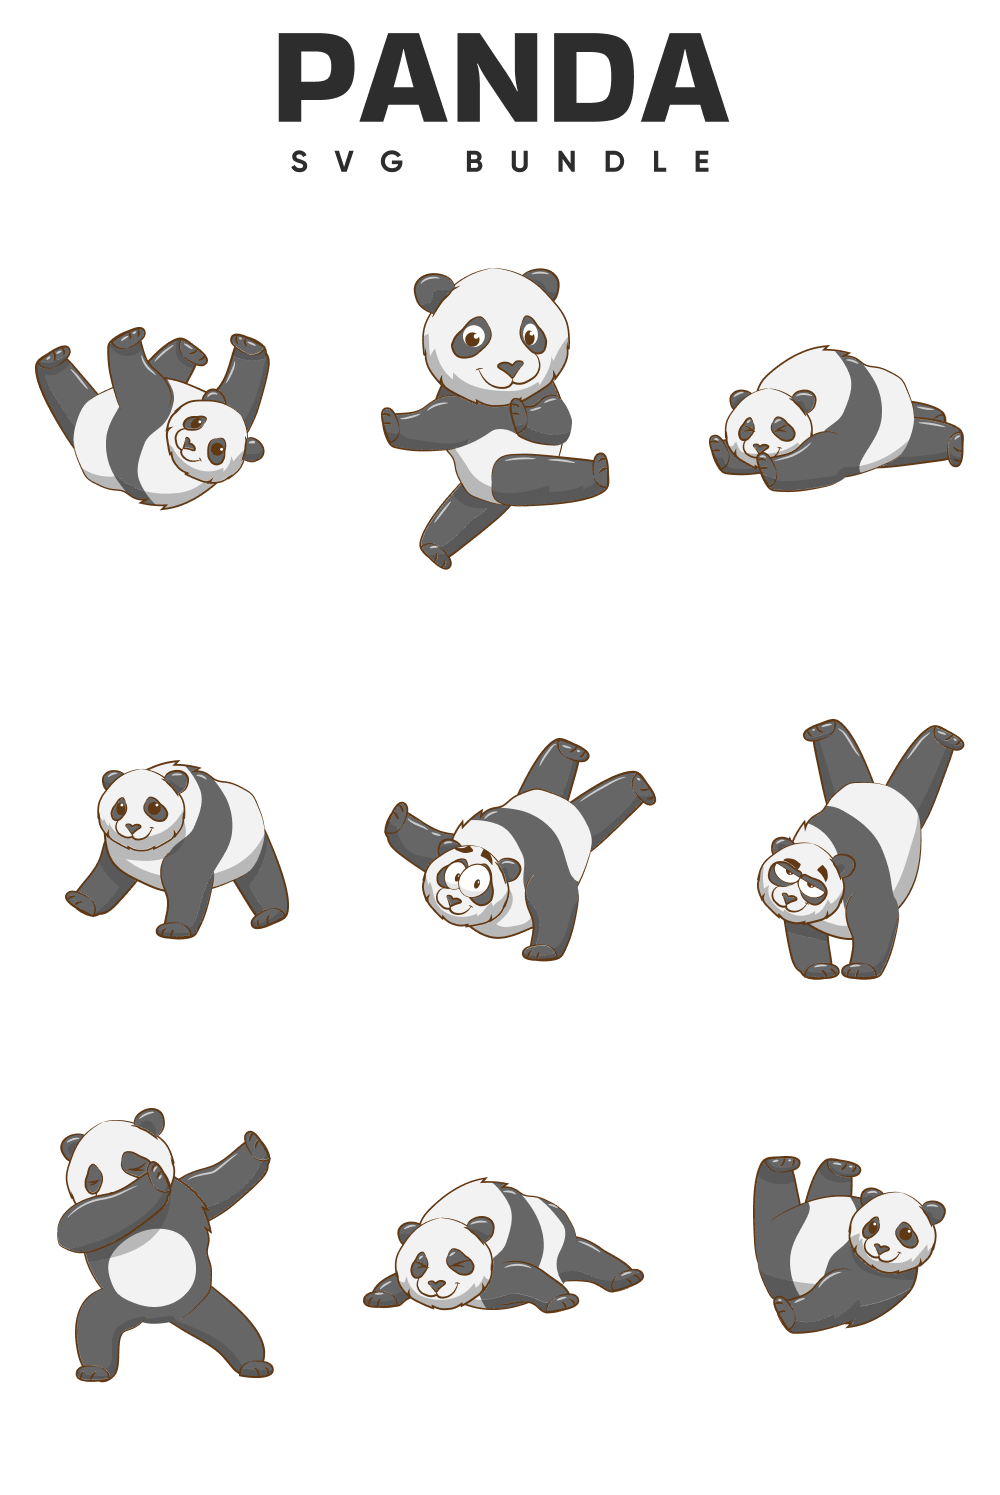 Bunch of panda stickers that are on a white surface.